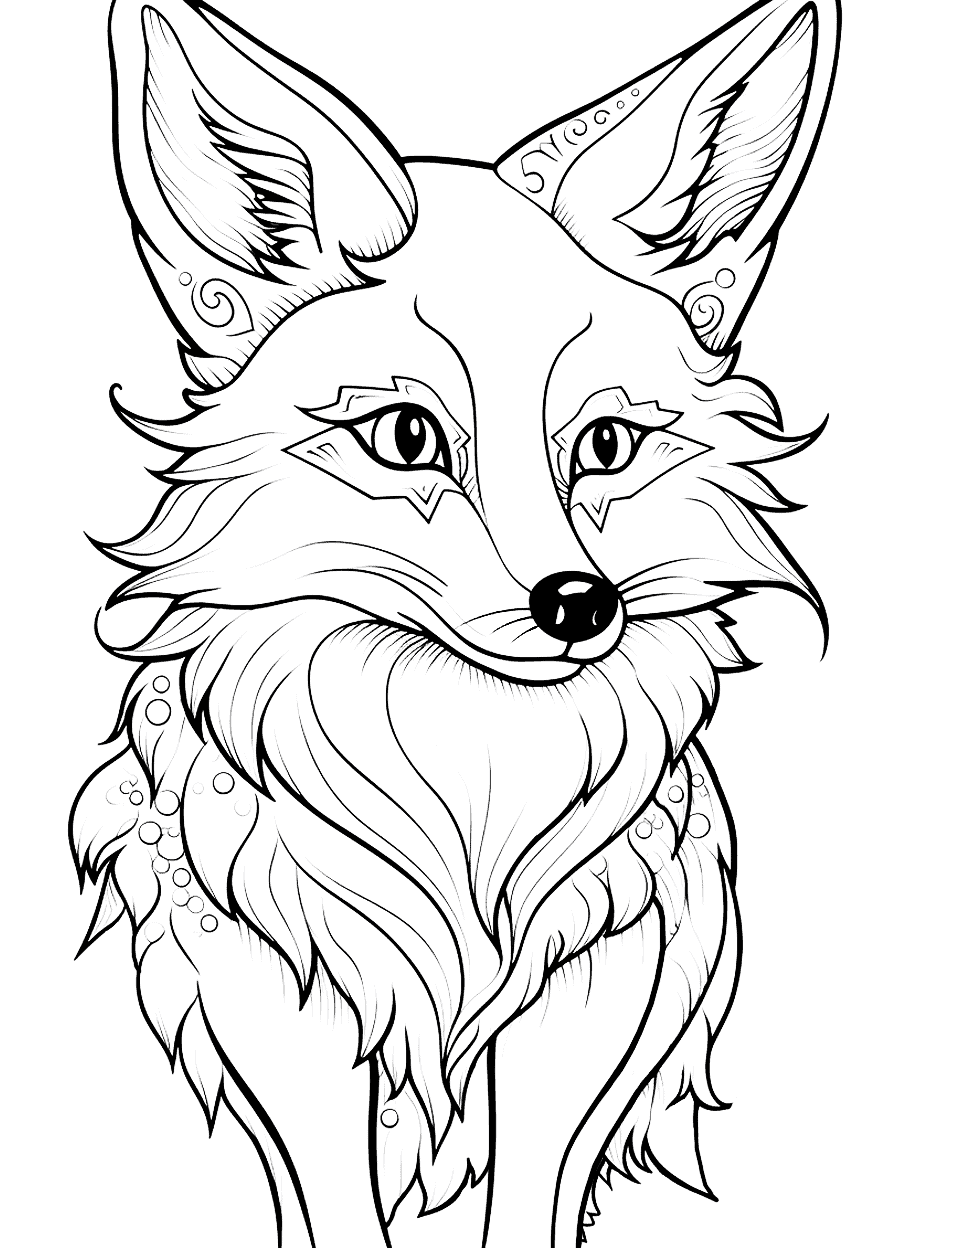 Advanced Fox Portrait Coloring Page - A coloring page for adults and advanced kids, showing every intricate detail of a fox’s beauty.